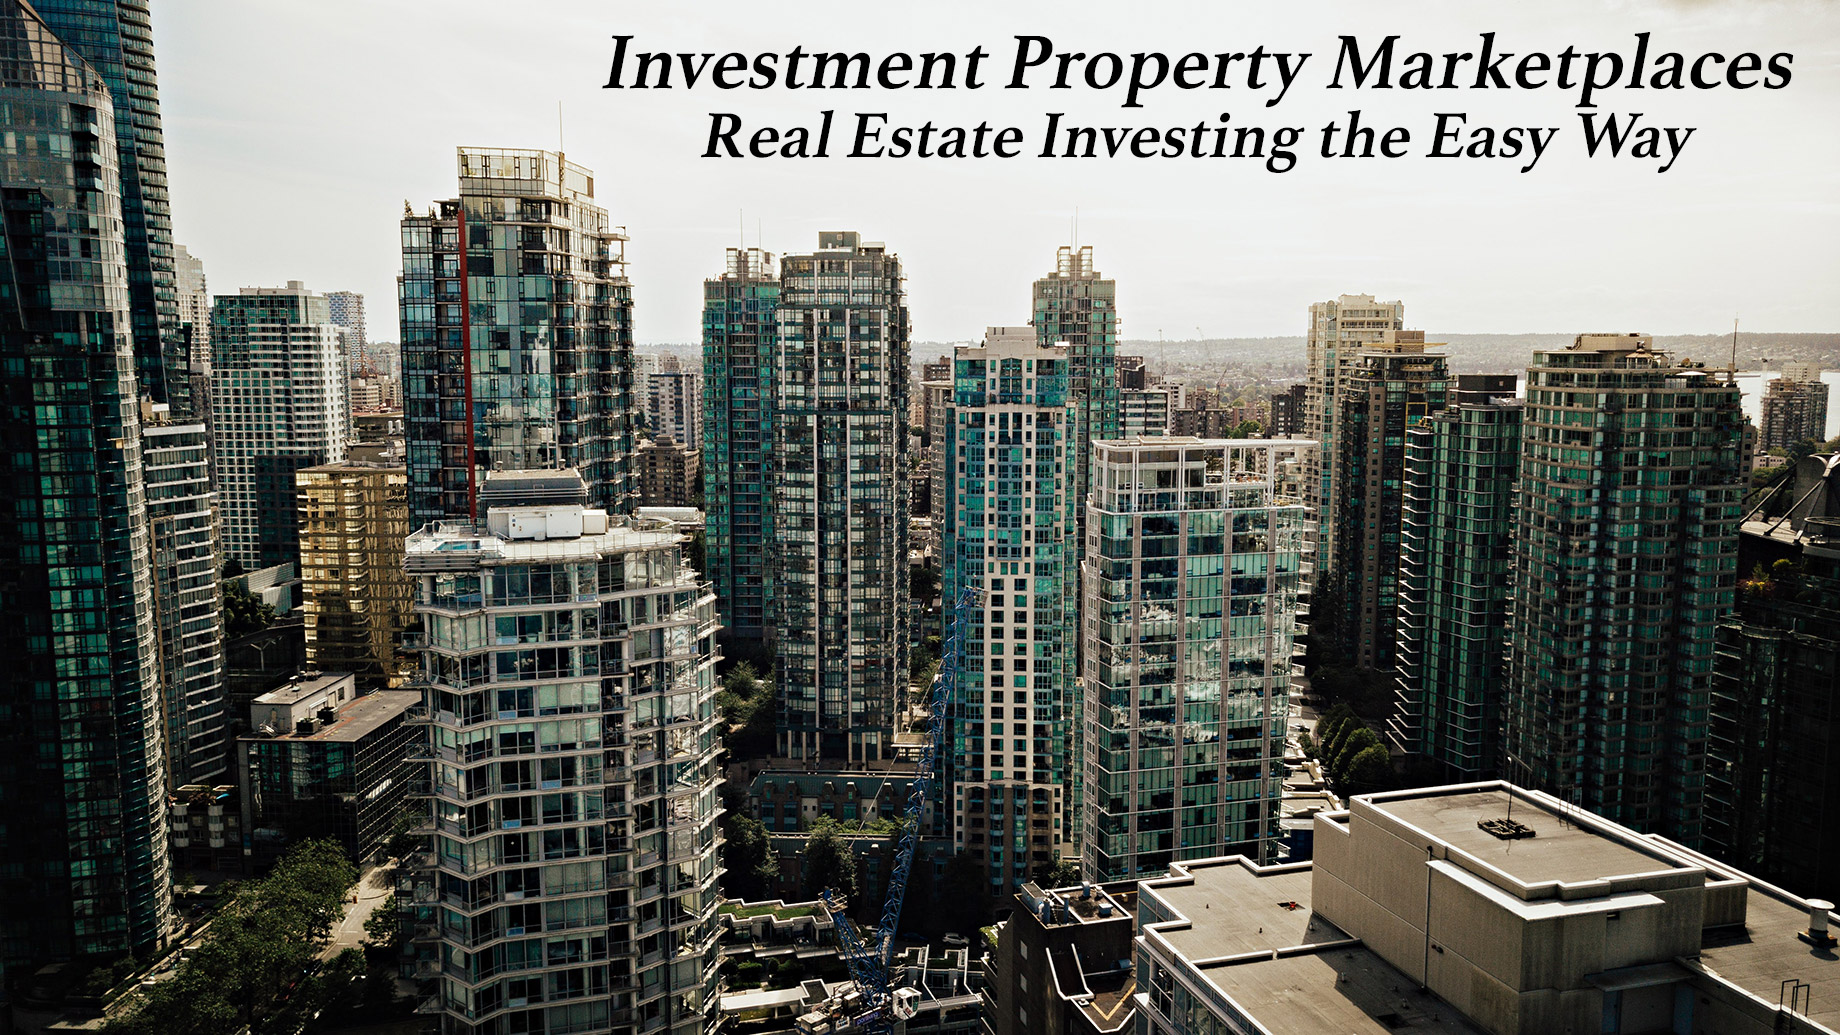 Investment Property Marketplaces - Real Estate Investing the Easy Way